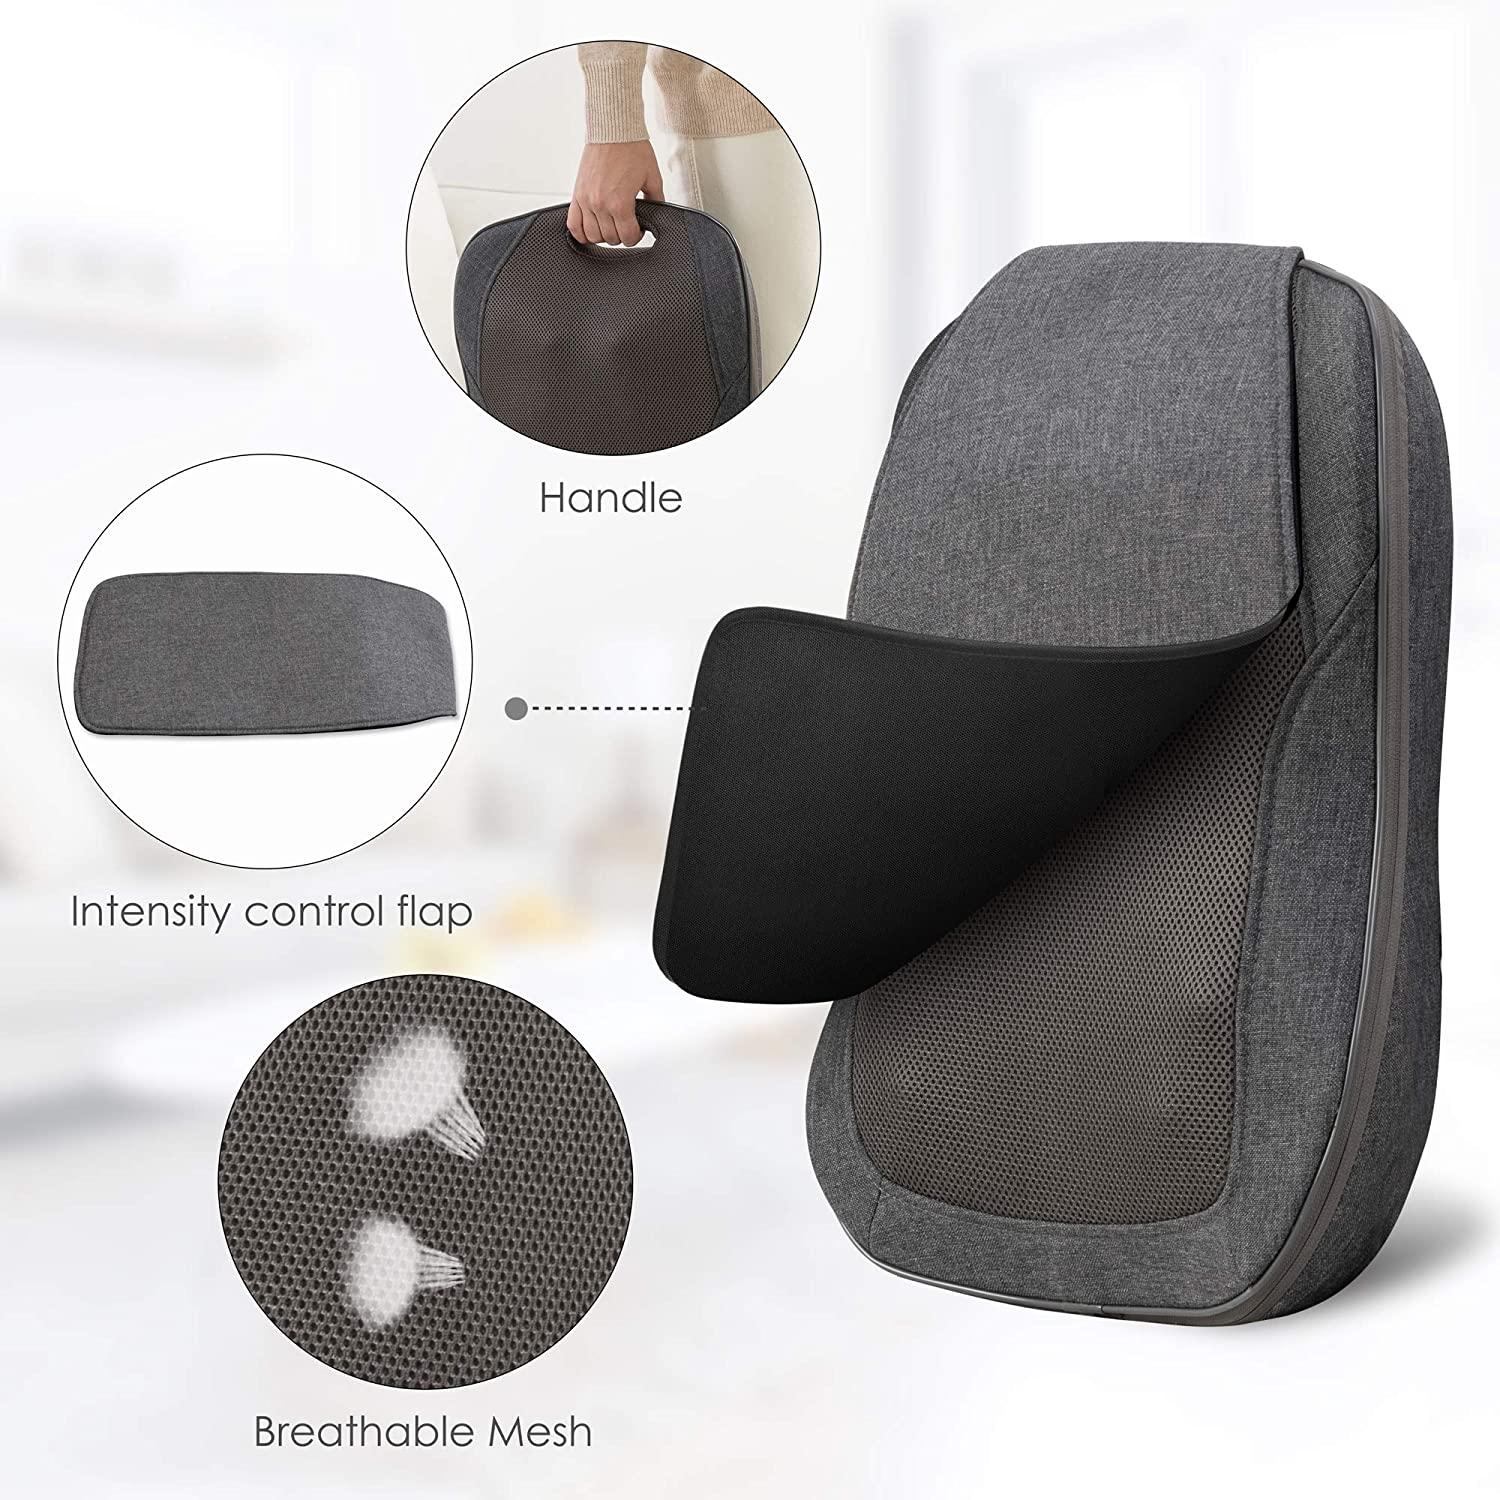 Comfier Back Massager with Heat,Shiatsu Massage Chair Pad,Deep Kneading  Full Back Massage Cushion for Shoulder,Back for Home,Office use Gray